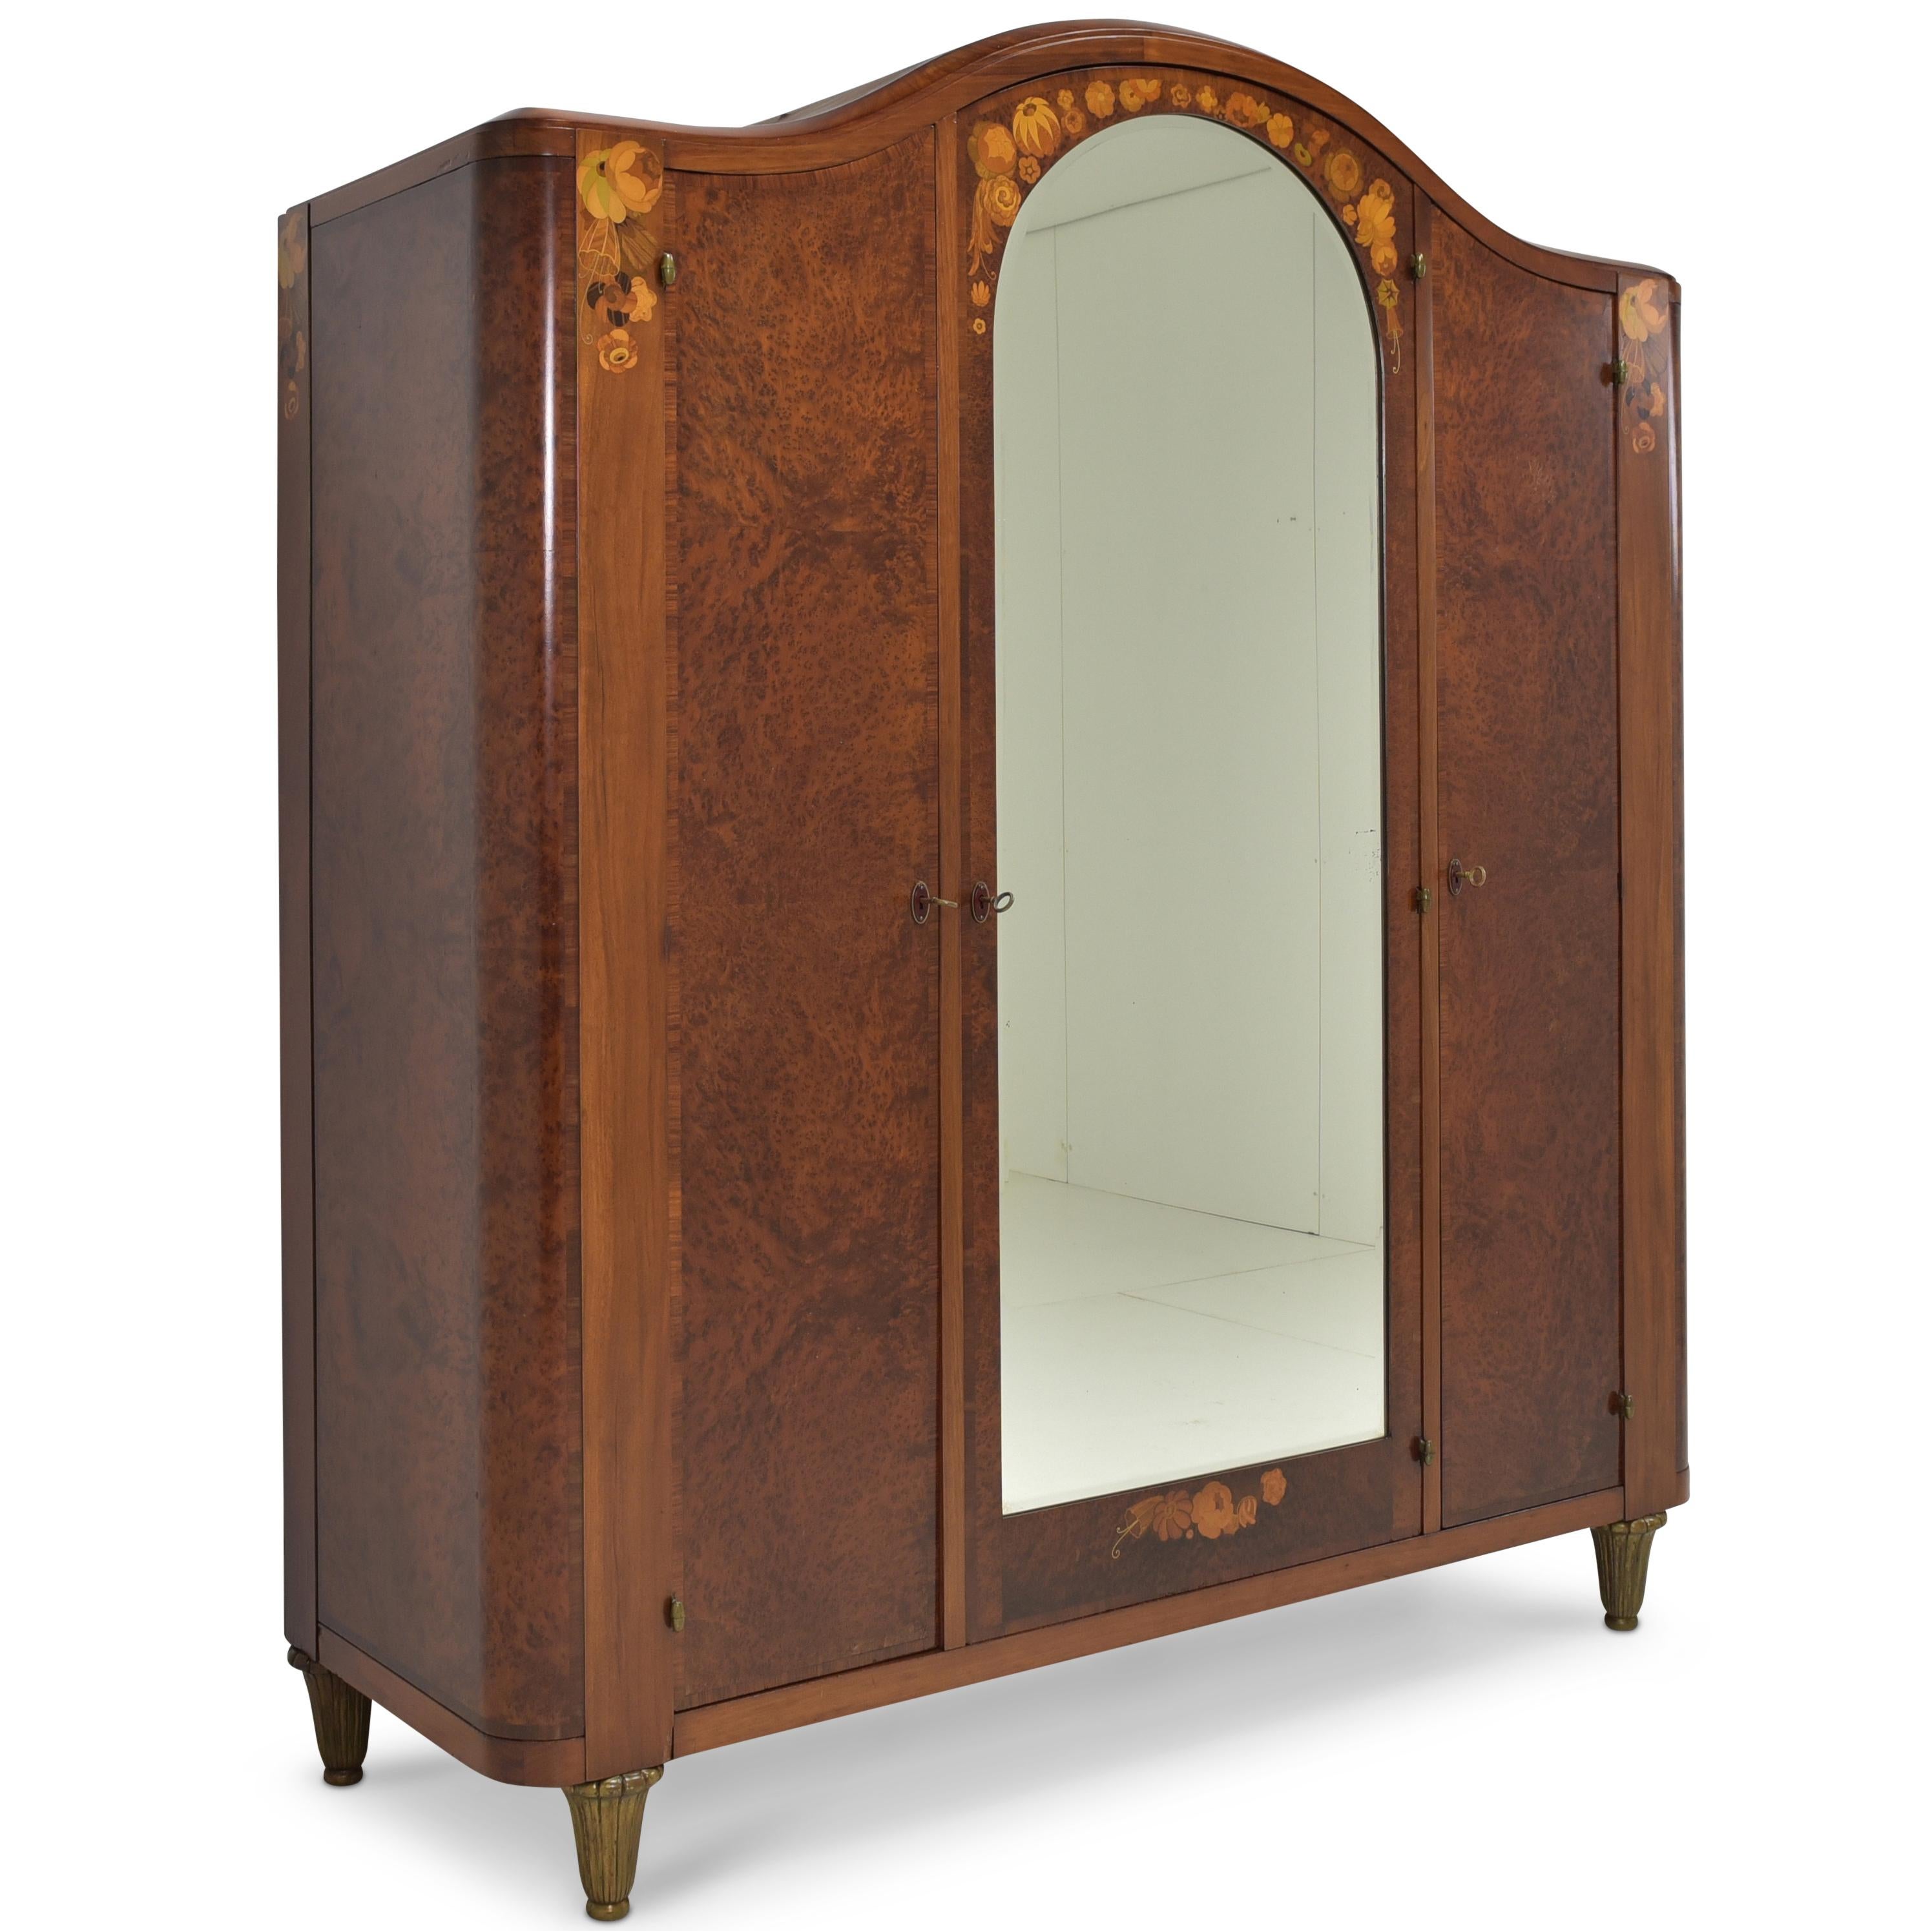 Wardrobe restored Art Deco around 1925 mahogany burl

Features:
Three-door model with mirror, 2 hanging rails and 4 shelves
Height-adjustable shelves
Very high quality processing
Original faceted mirror
Original, high-quality brass feet
Very